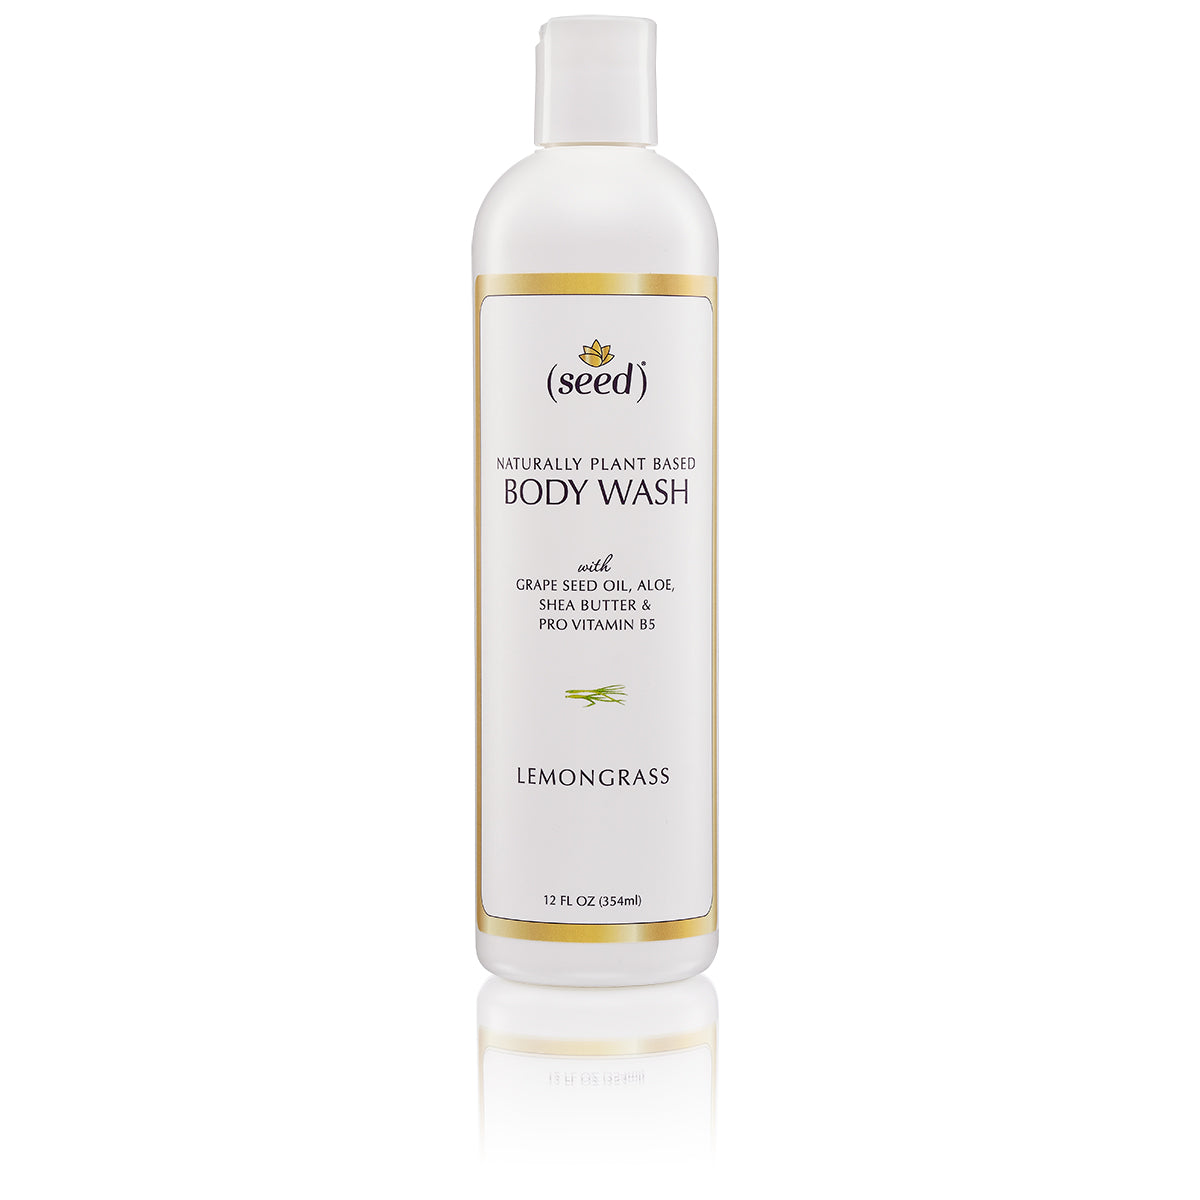 Seed Lemongrass Body Wash features grape seed oil, aloe, shea butter, provitamin b5, and Lemongrass essential oil